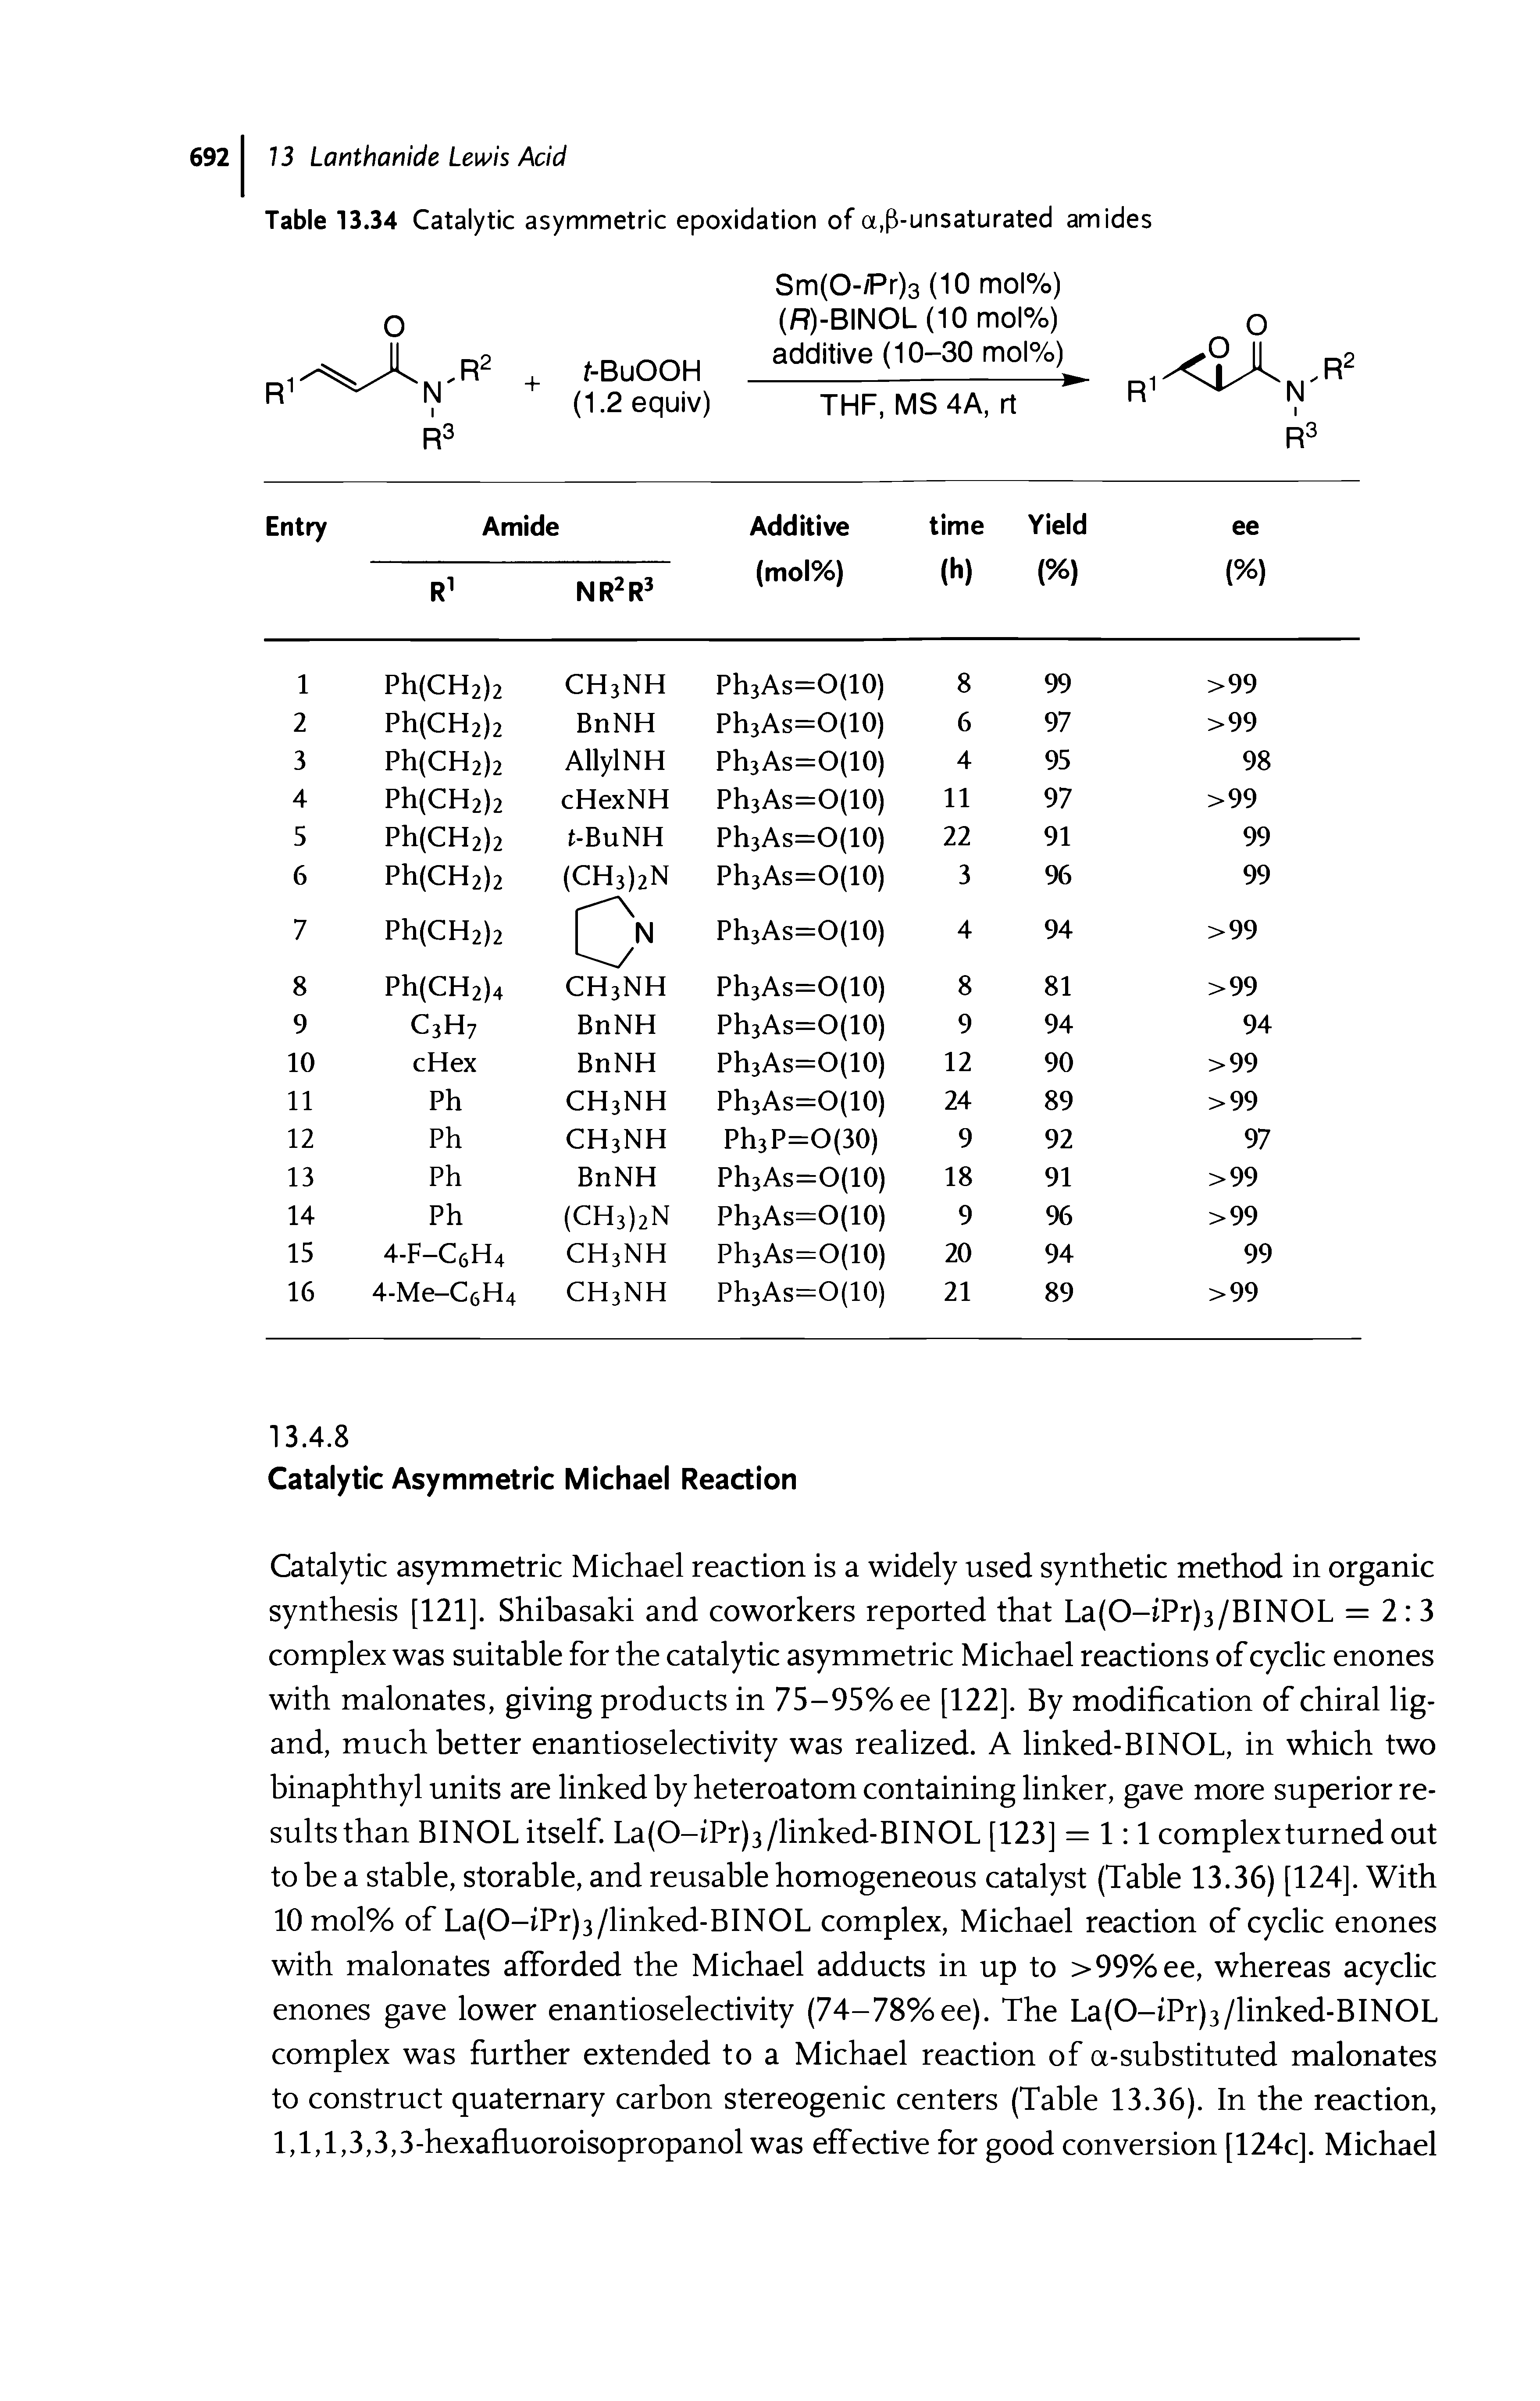 Table 13.34 Catalytic asymmetric epoxidation of a,p-unsaturated amides...